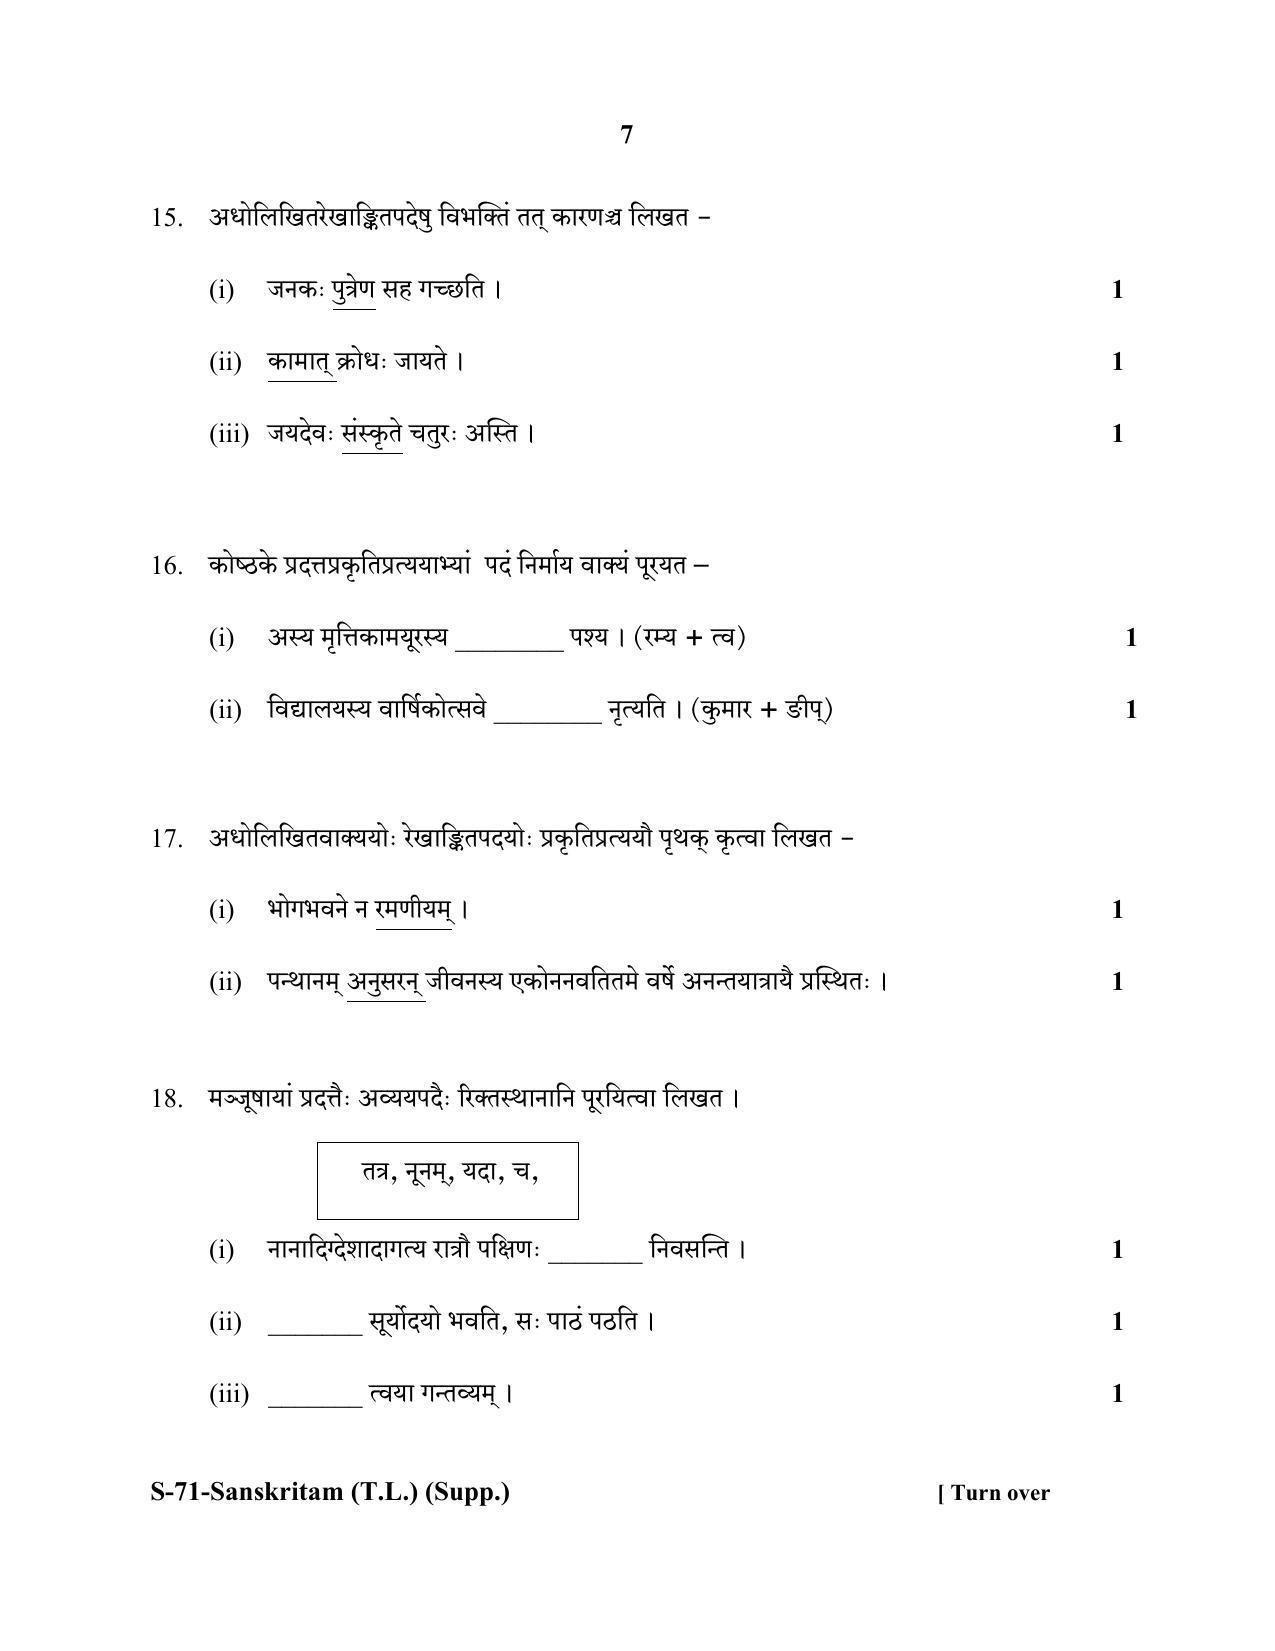 RBSE Class 10 Sanskrit TL Supplementary 2020 Question Paper - Page 7